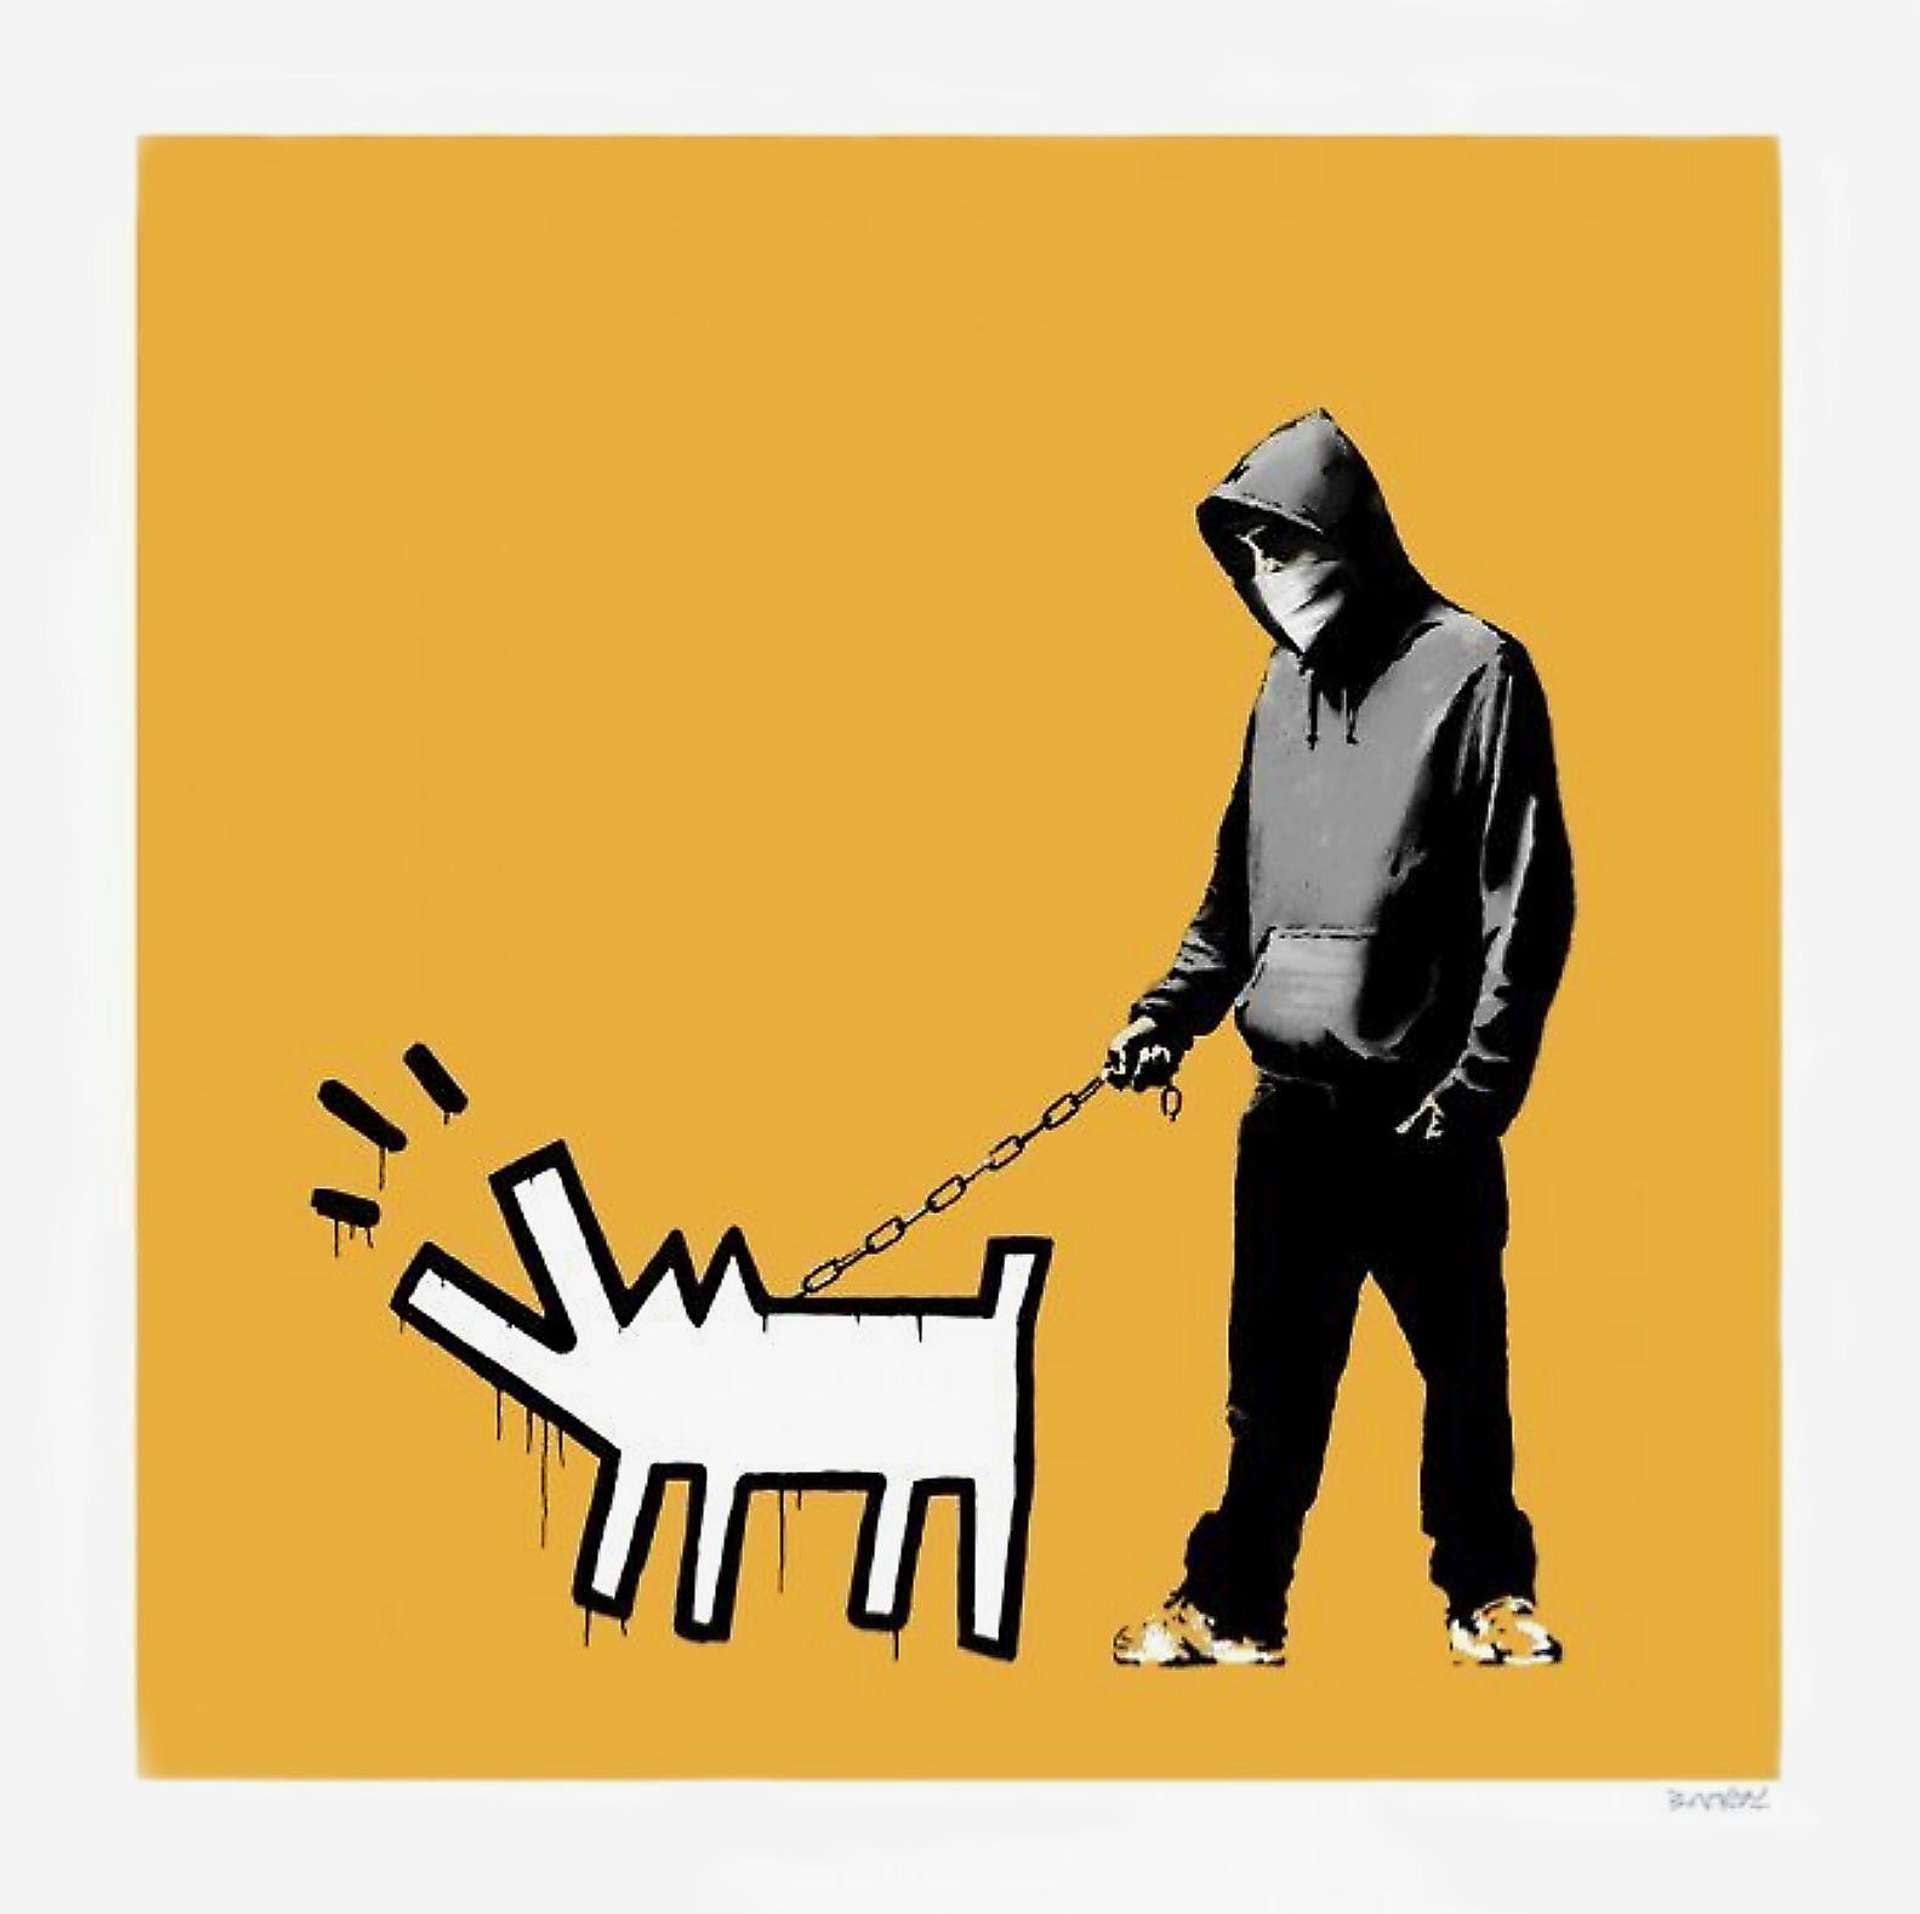 A Banksy print depicting a man wearing an oversized hooded jacket with a bandana covering his face. The man is holding a cartoonish barking dog on a chain, which is borrowed from a Keith Haring print. The figures are set against a light orange background.